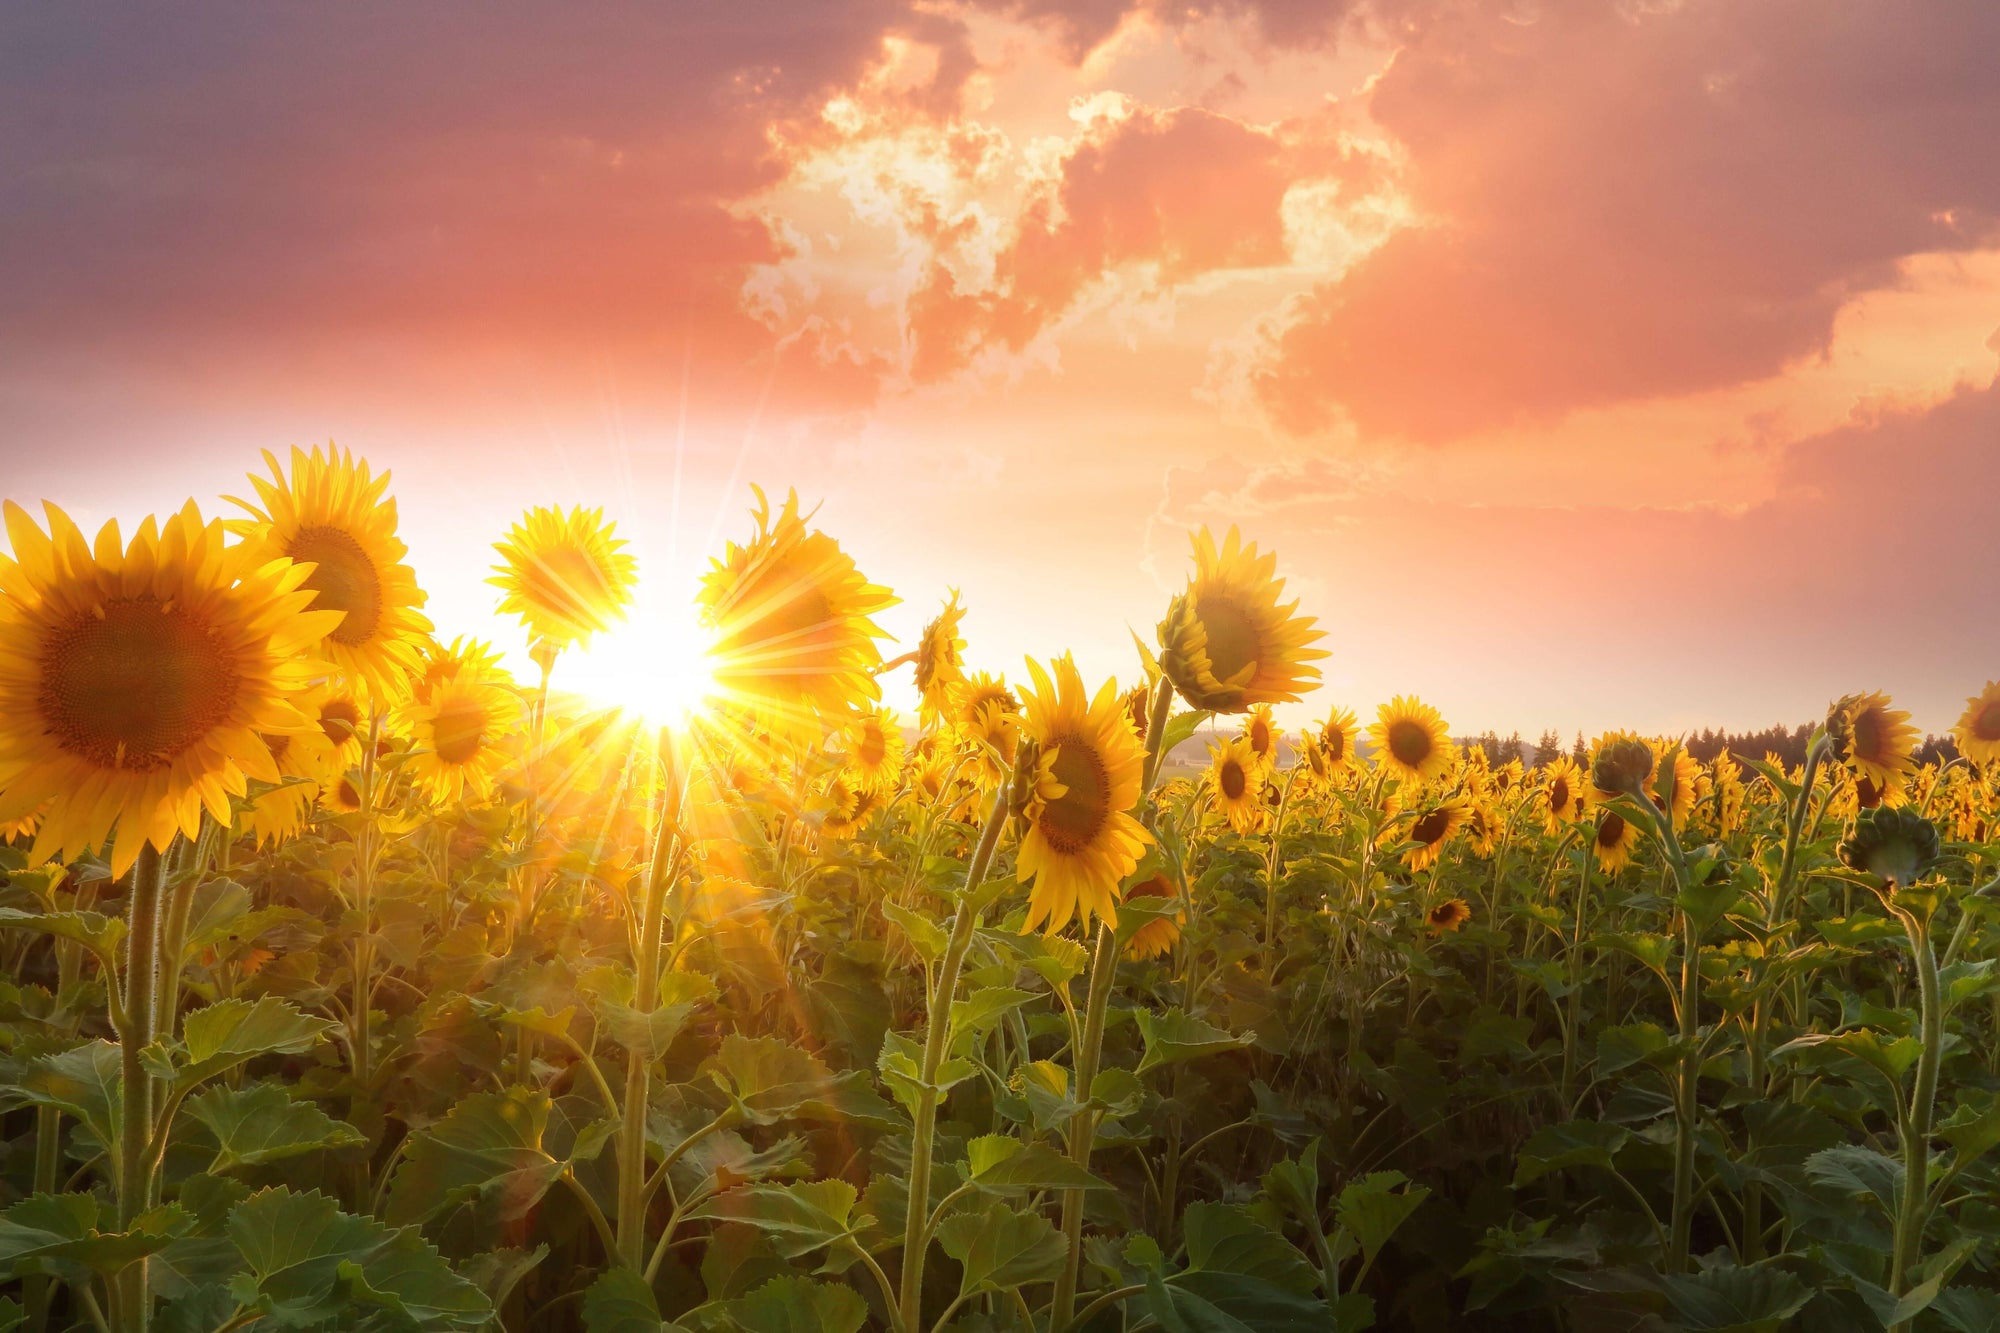 What is Sunflower Lecithin?